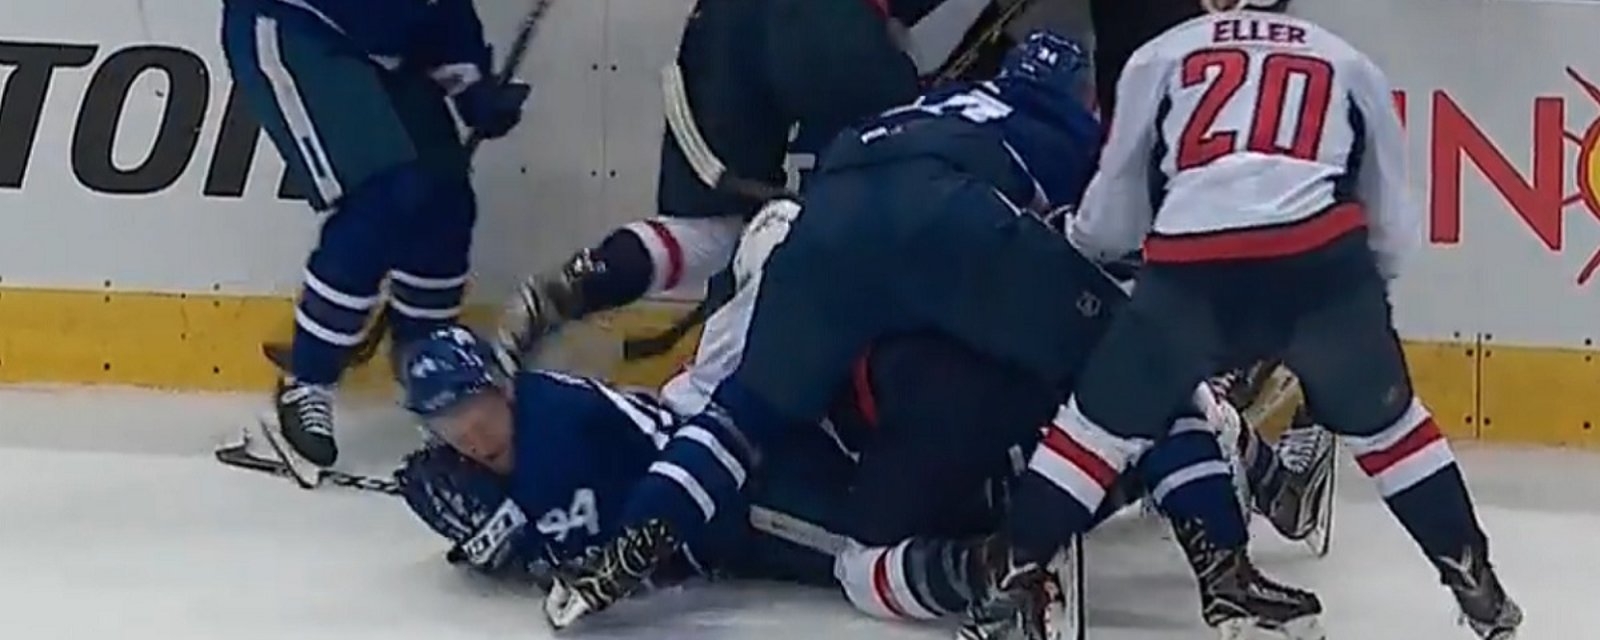 Breaking: Morgan Rielly takes a skate to the face in Game 4.